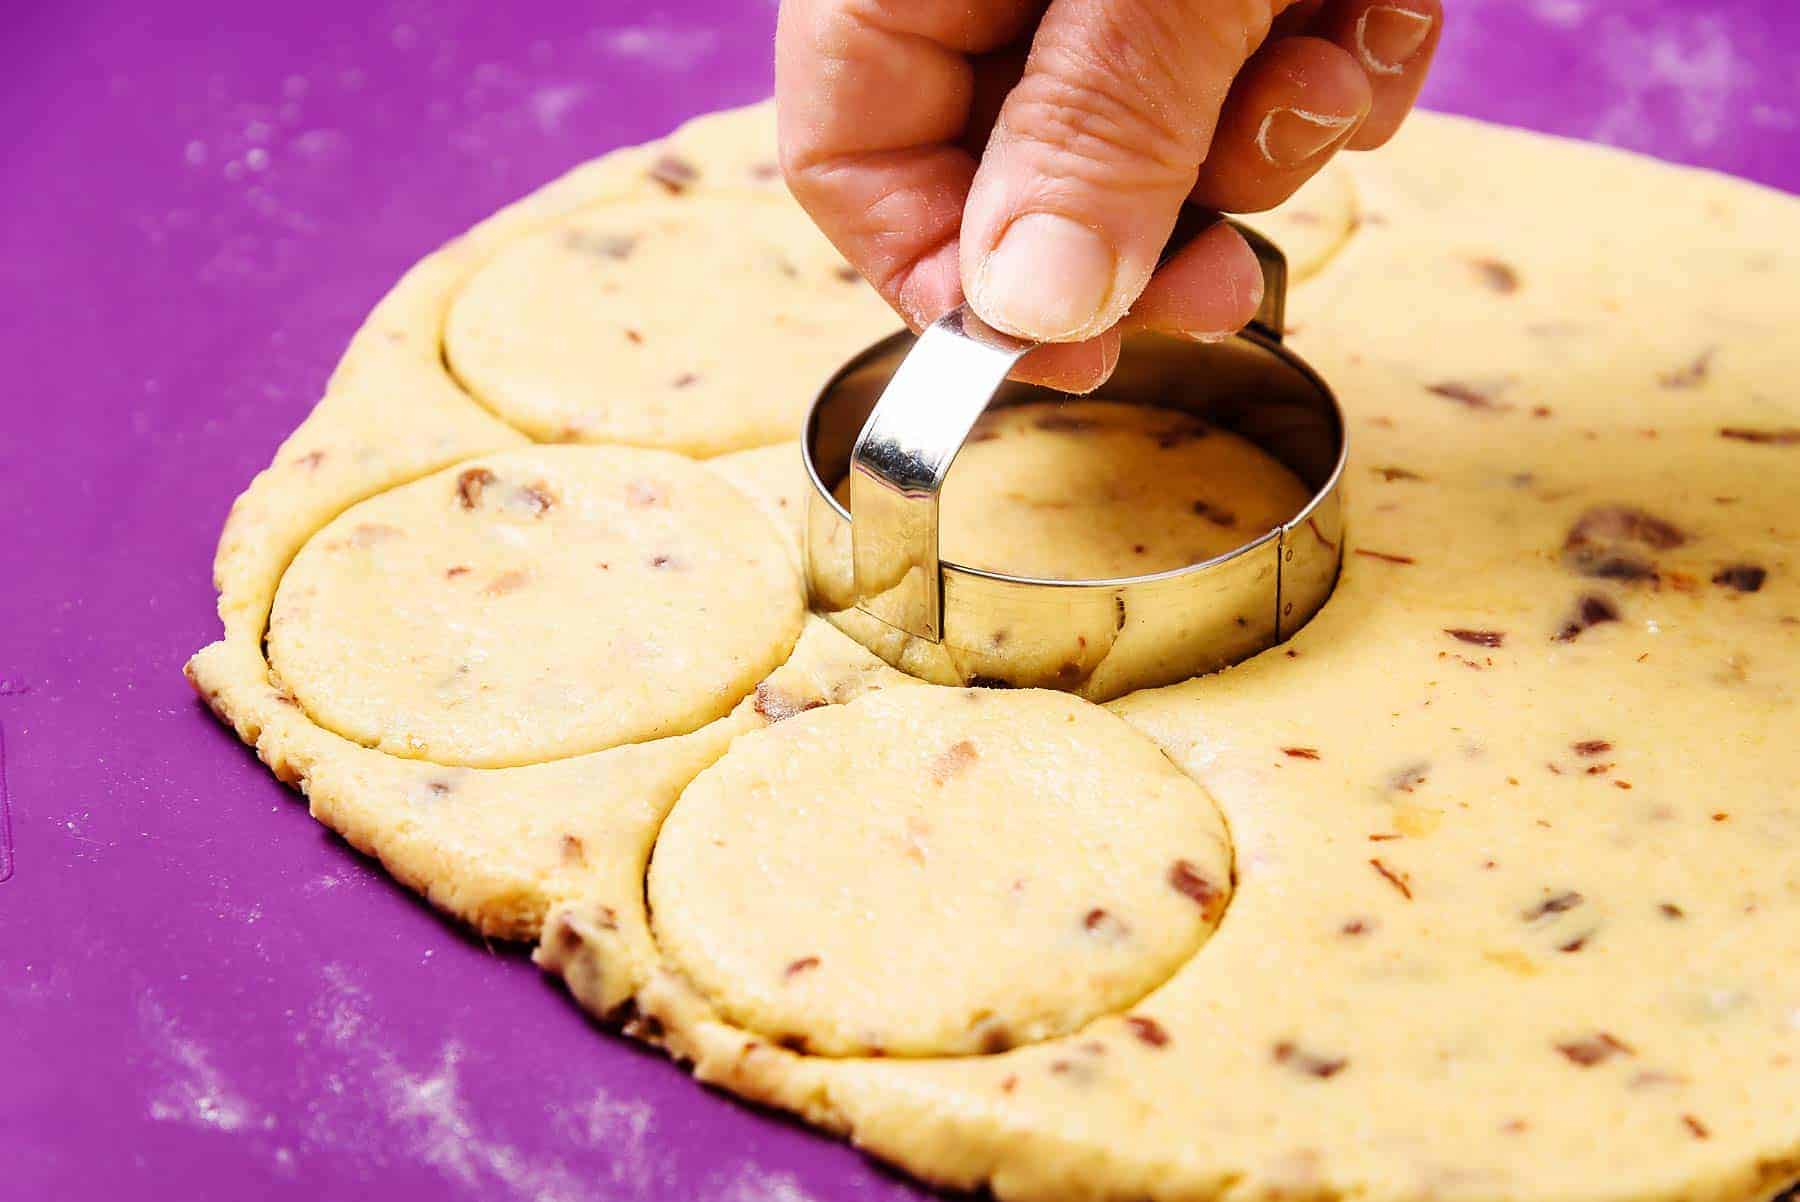 Cutting the cookies from the dough